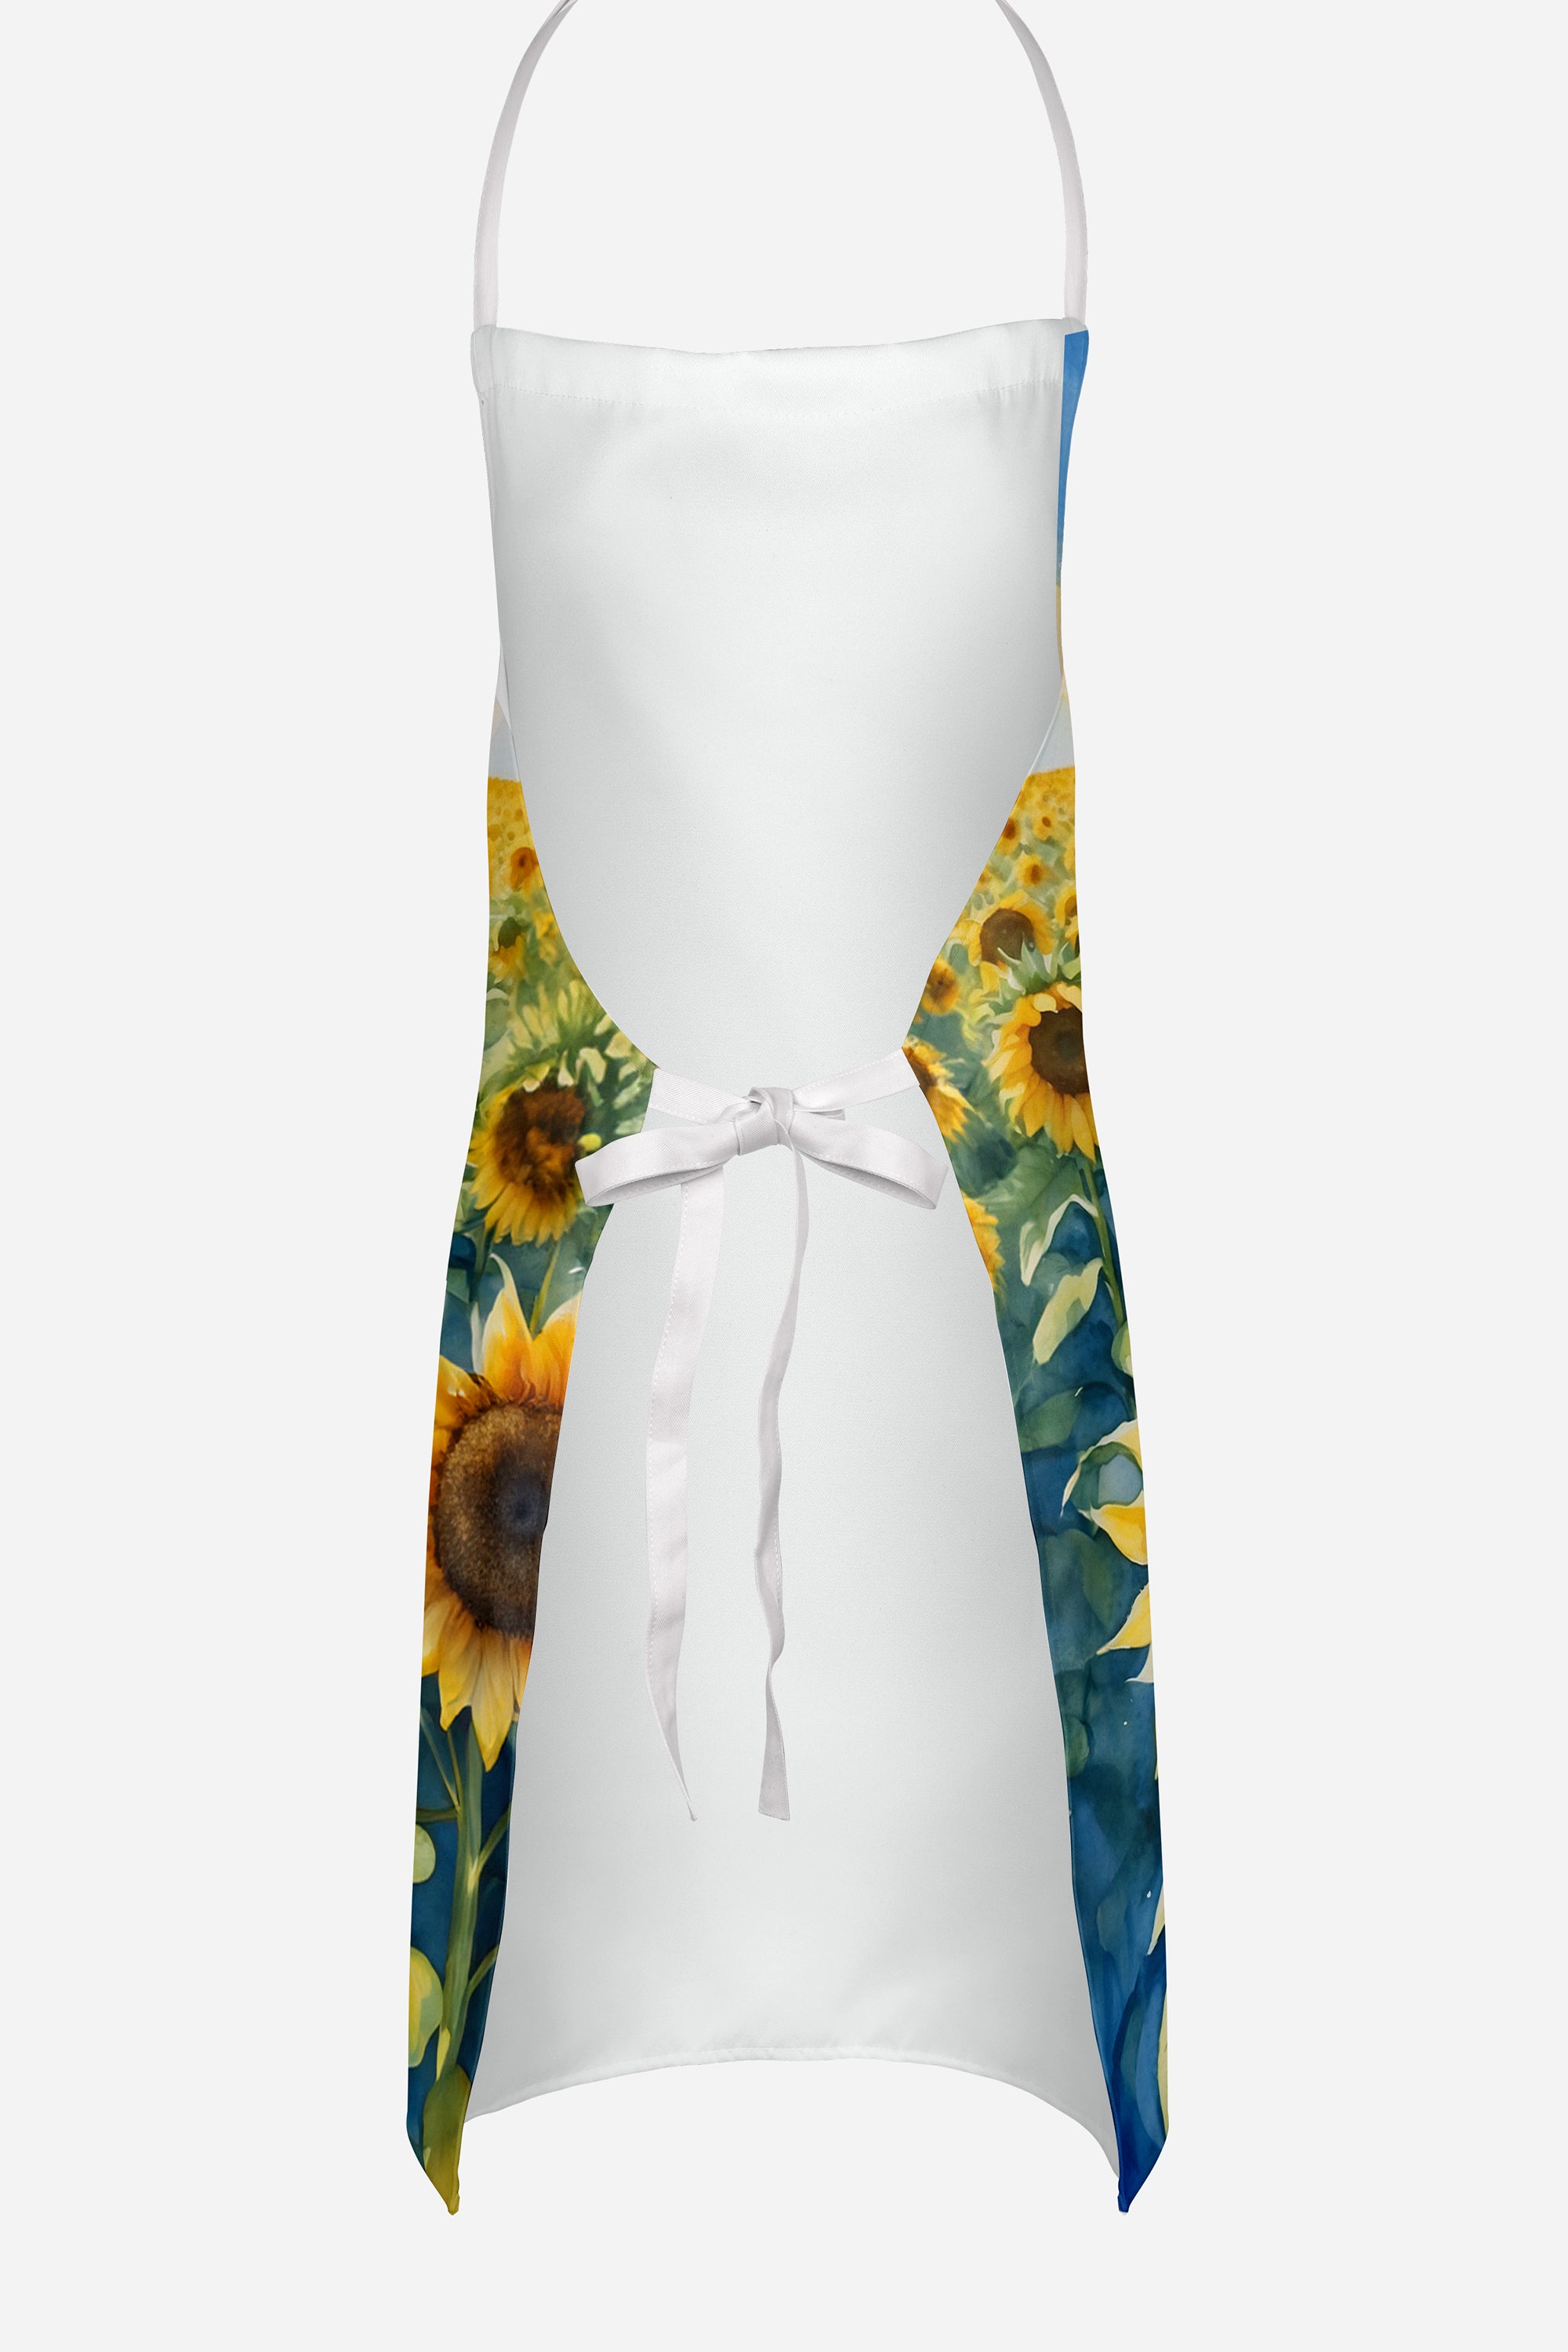 Great Pyrenees in Sunflowers Apron